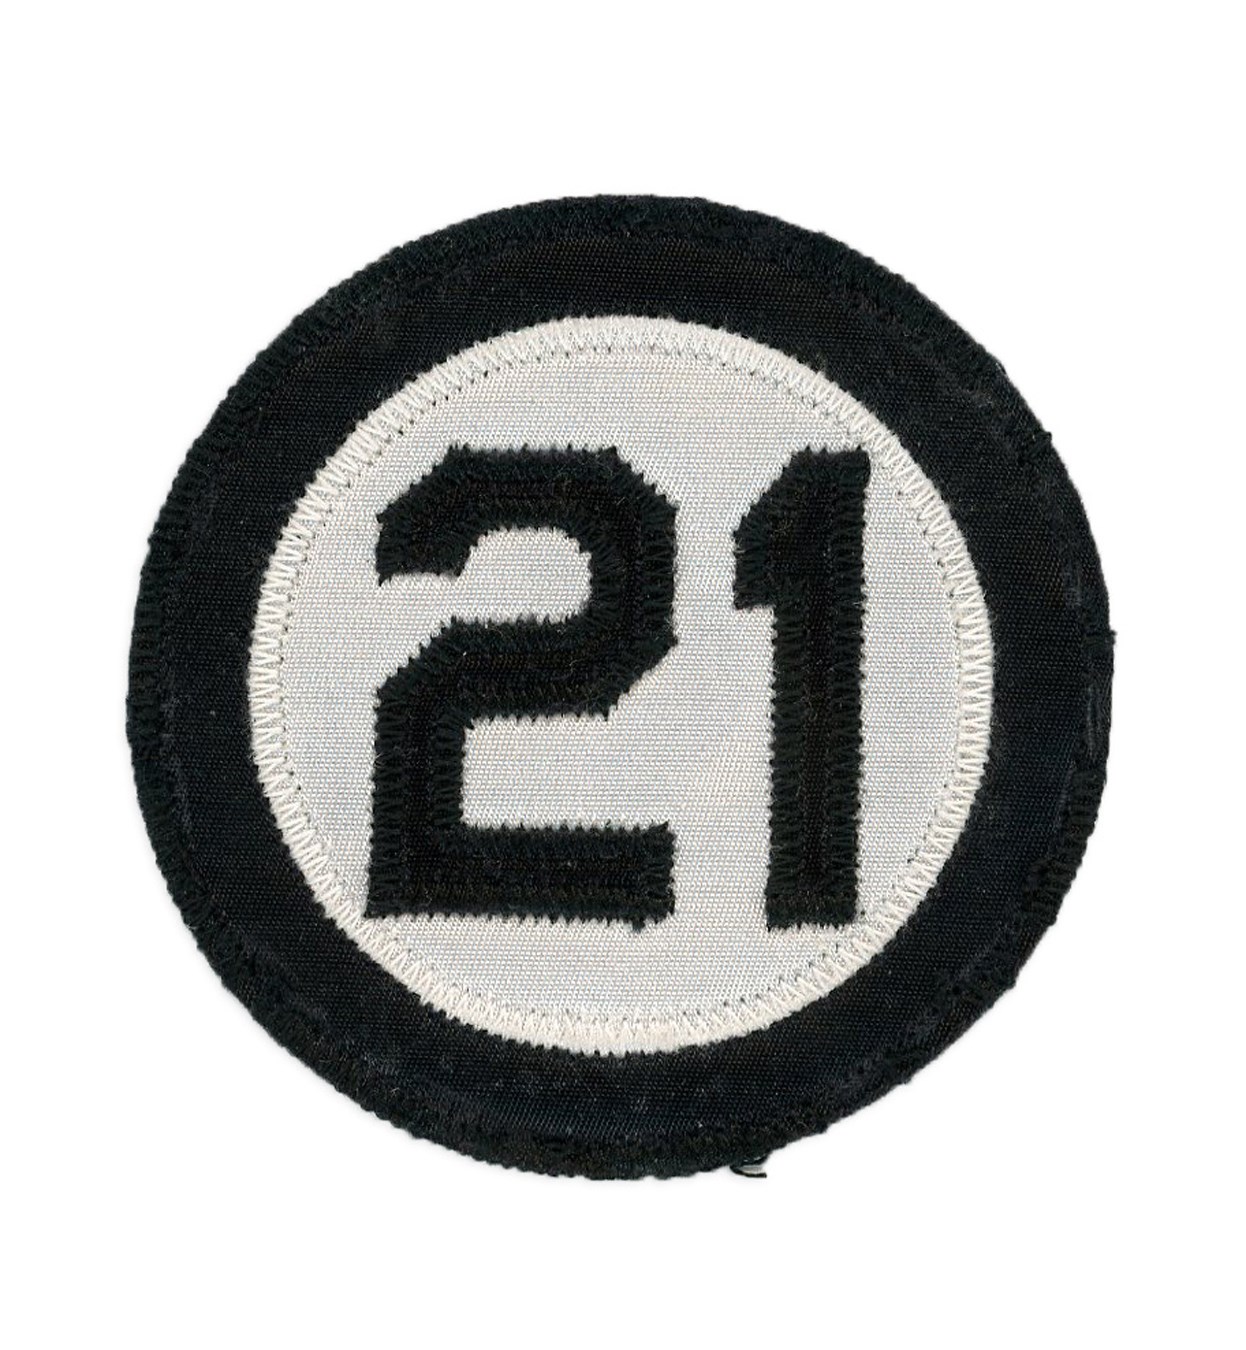 - 1973 Pittsburgh Pirates Roberto Clemente "21" Memorial Patch